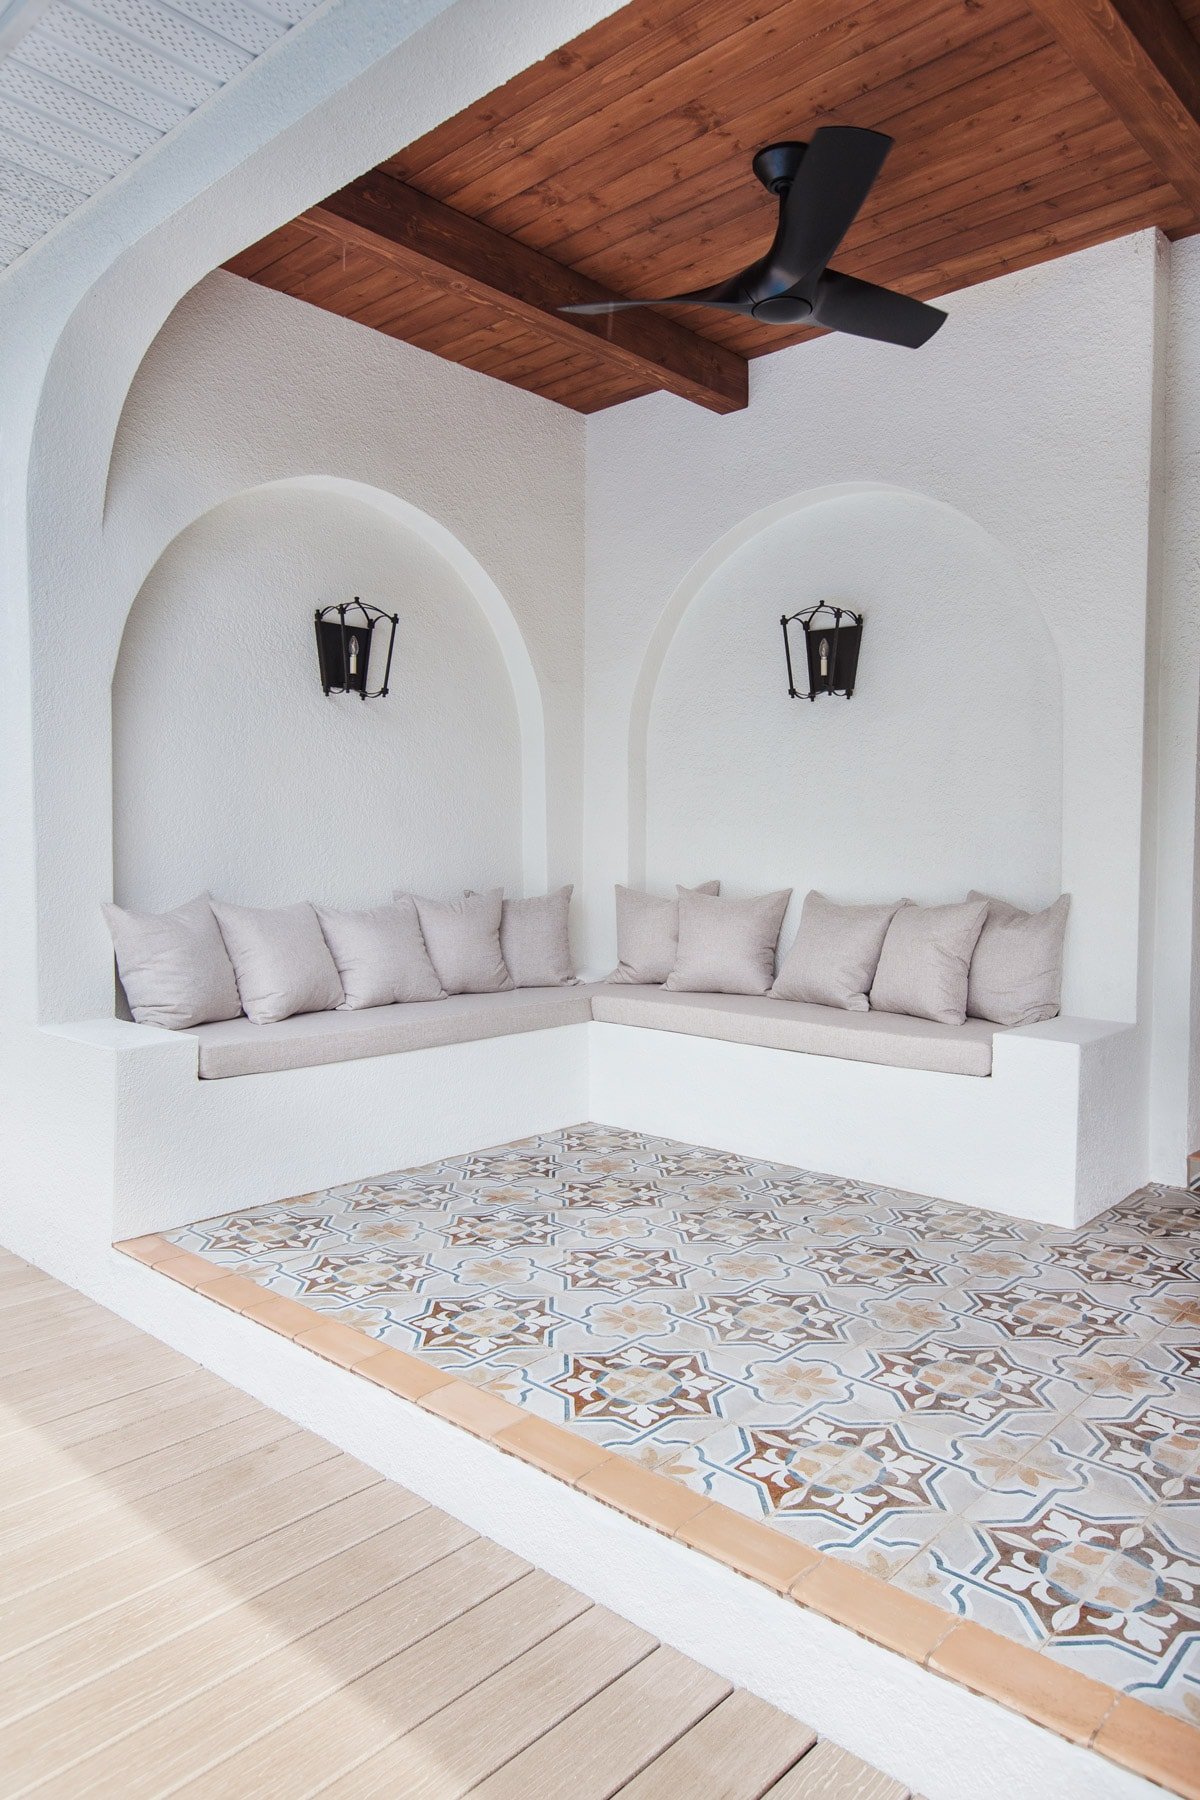 custom built in outdoor stucco sofa with arches